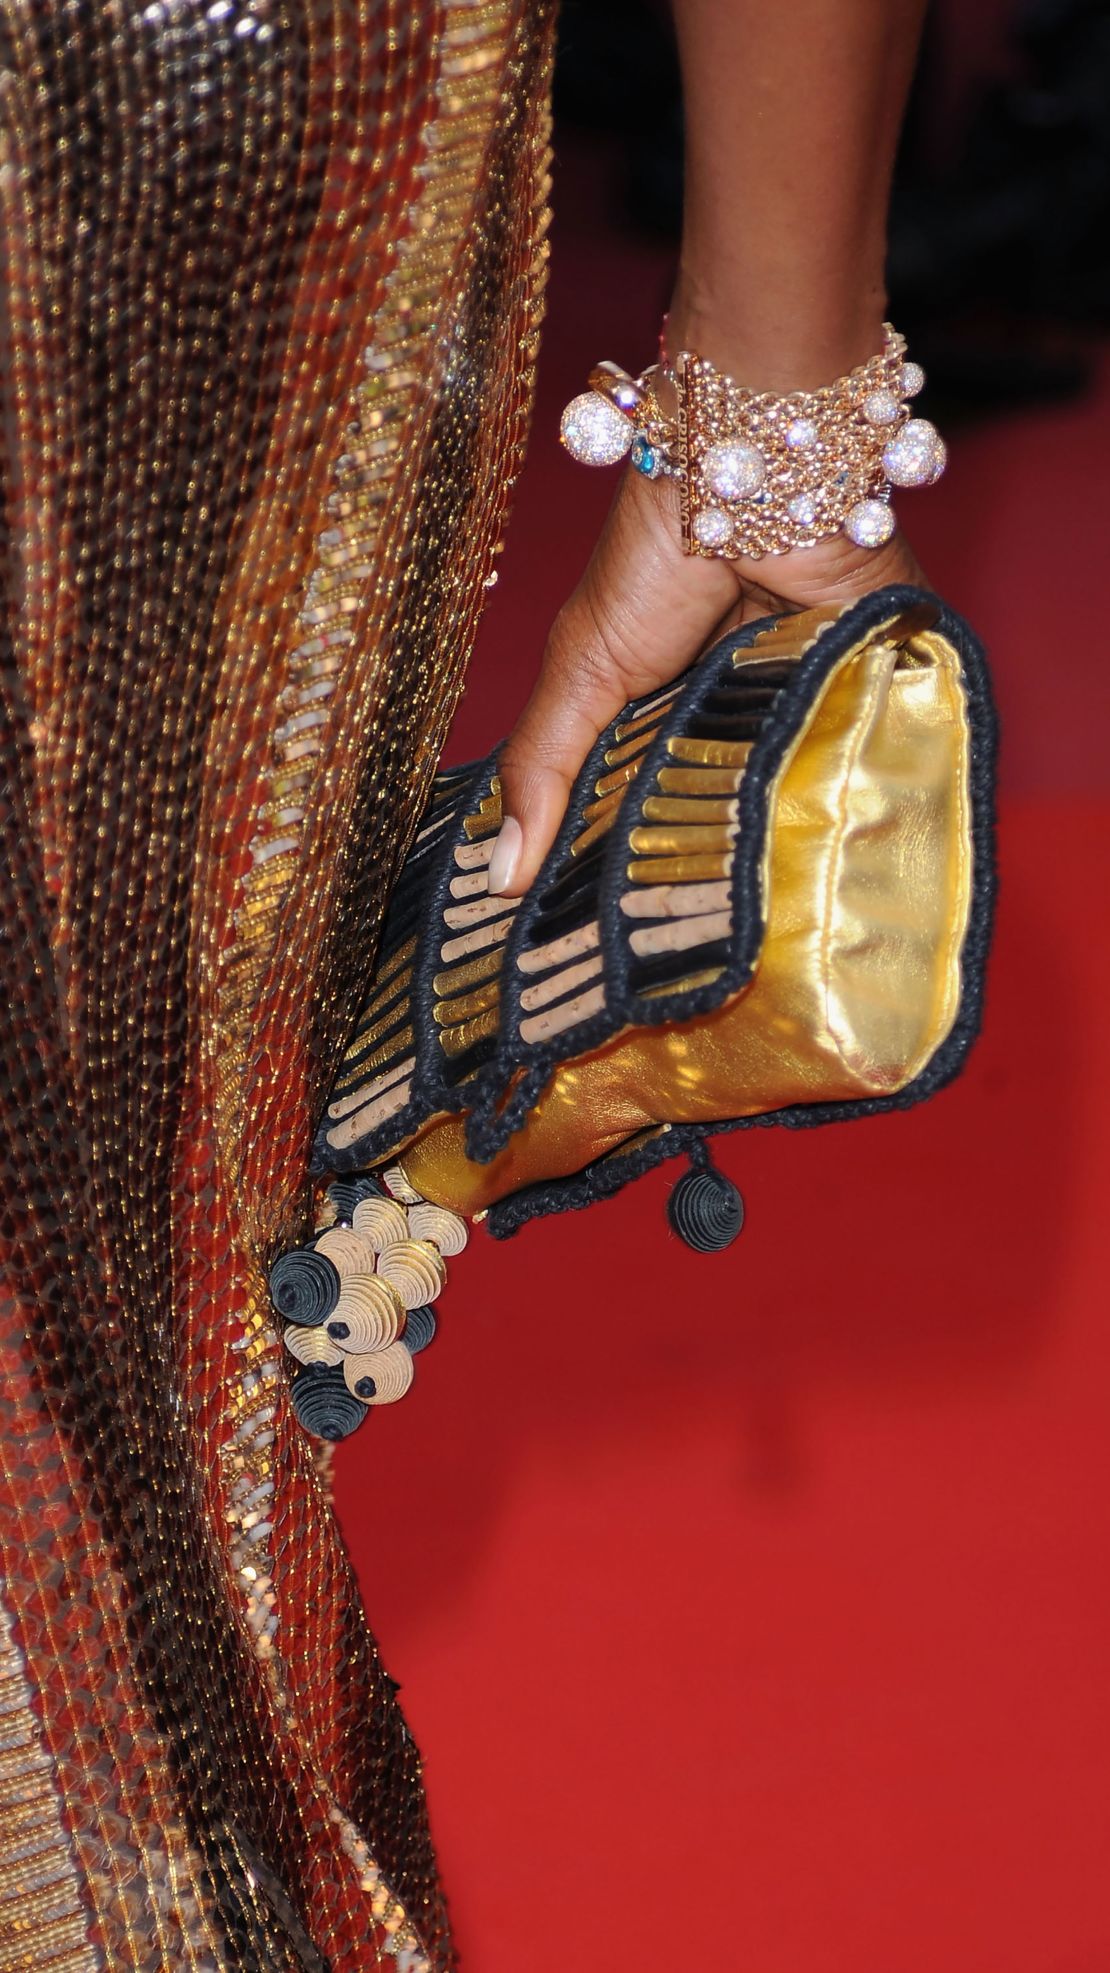 A detail of Naomi Campbell's bracelet and clutch.